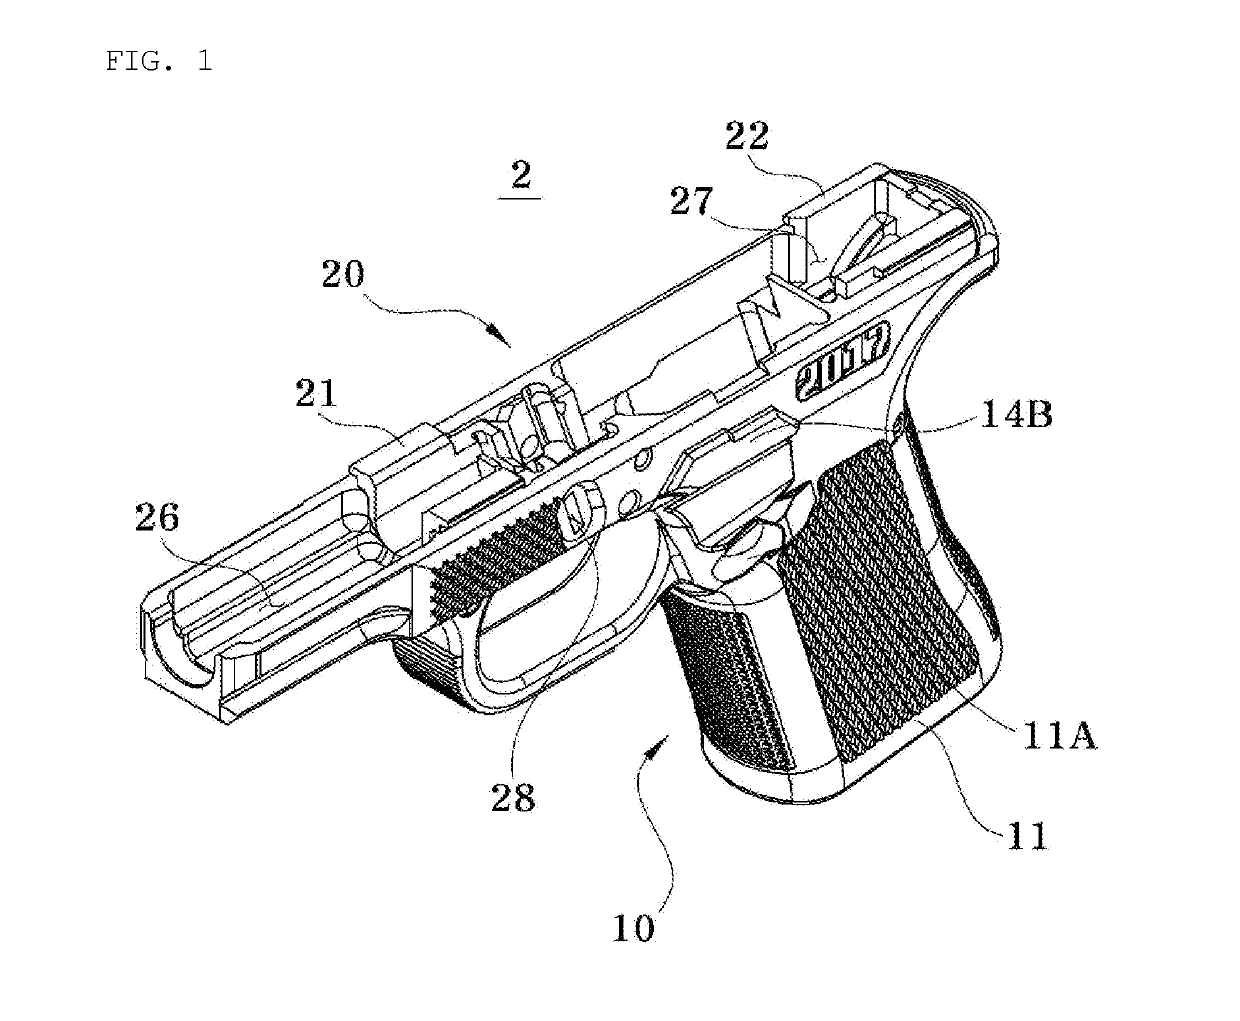 Frame for polymeric pistol with metal rail